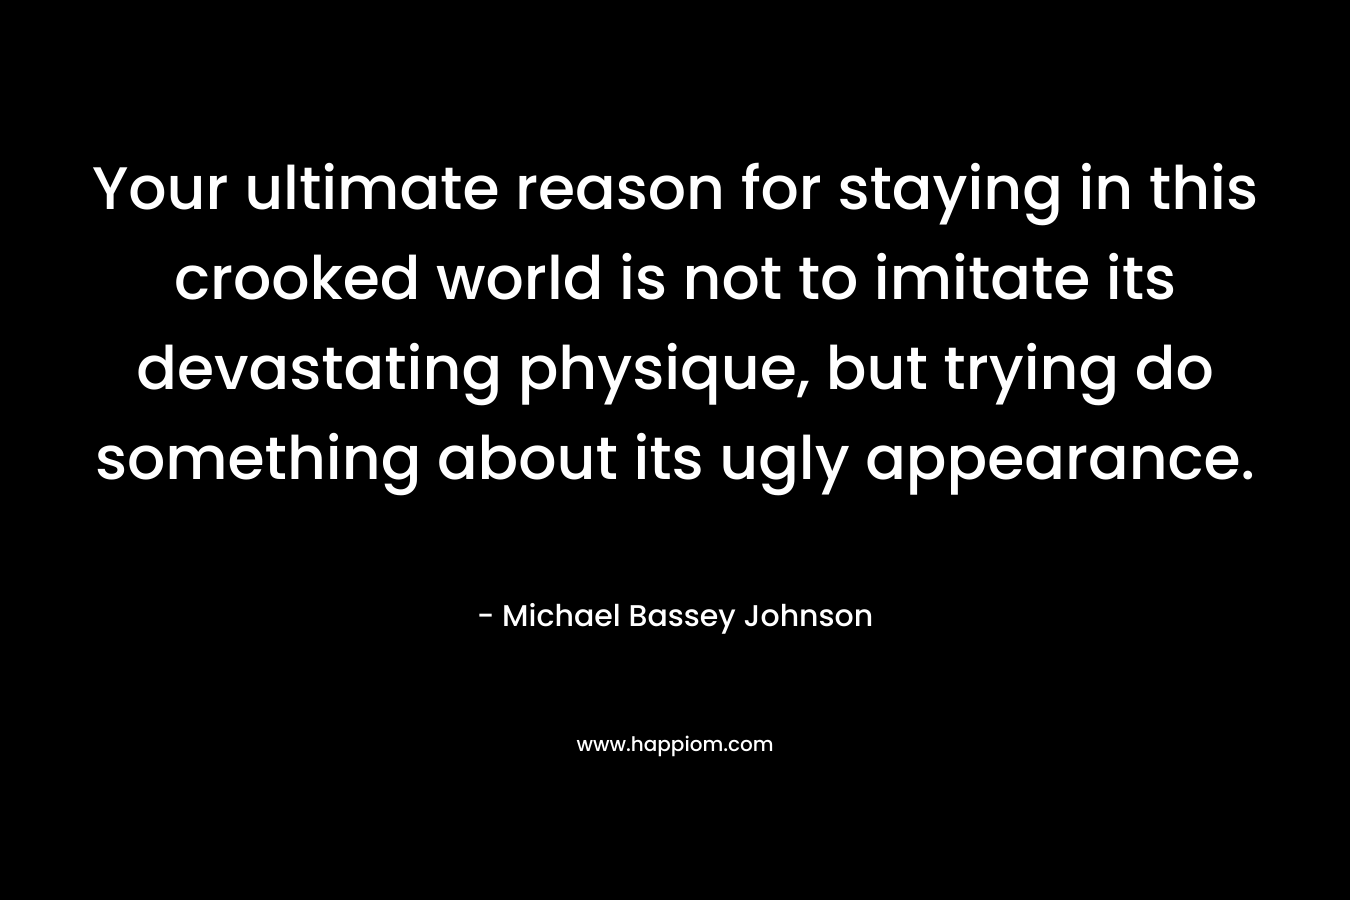 Your ultimate reason for staying in this crooked world is not to imitate its devastating physique, but trying do something about its ugly appearance. – Michael Bassey Johnson